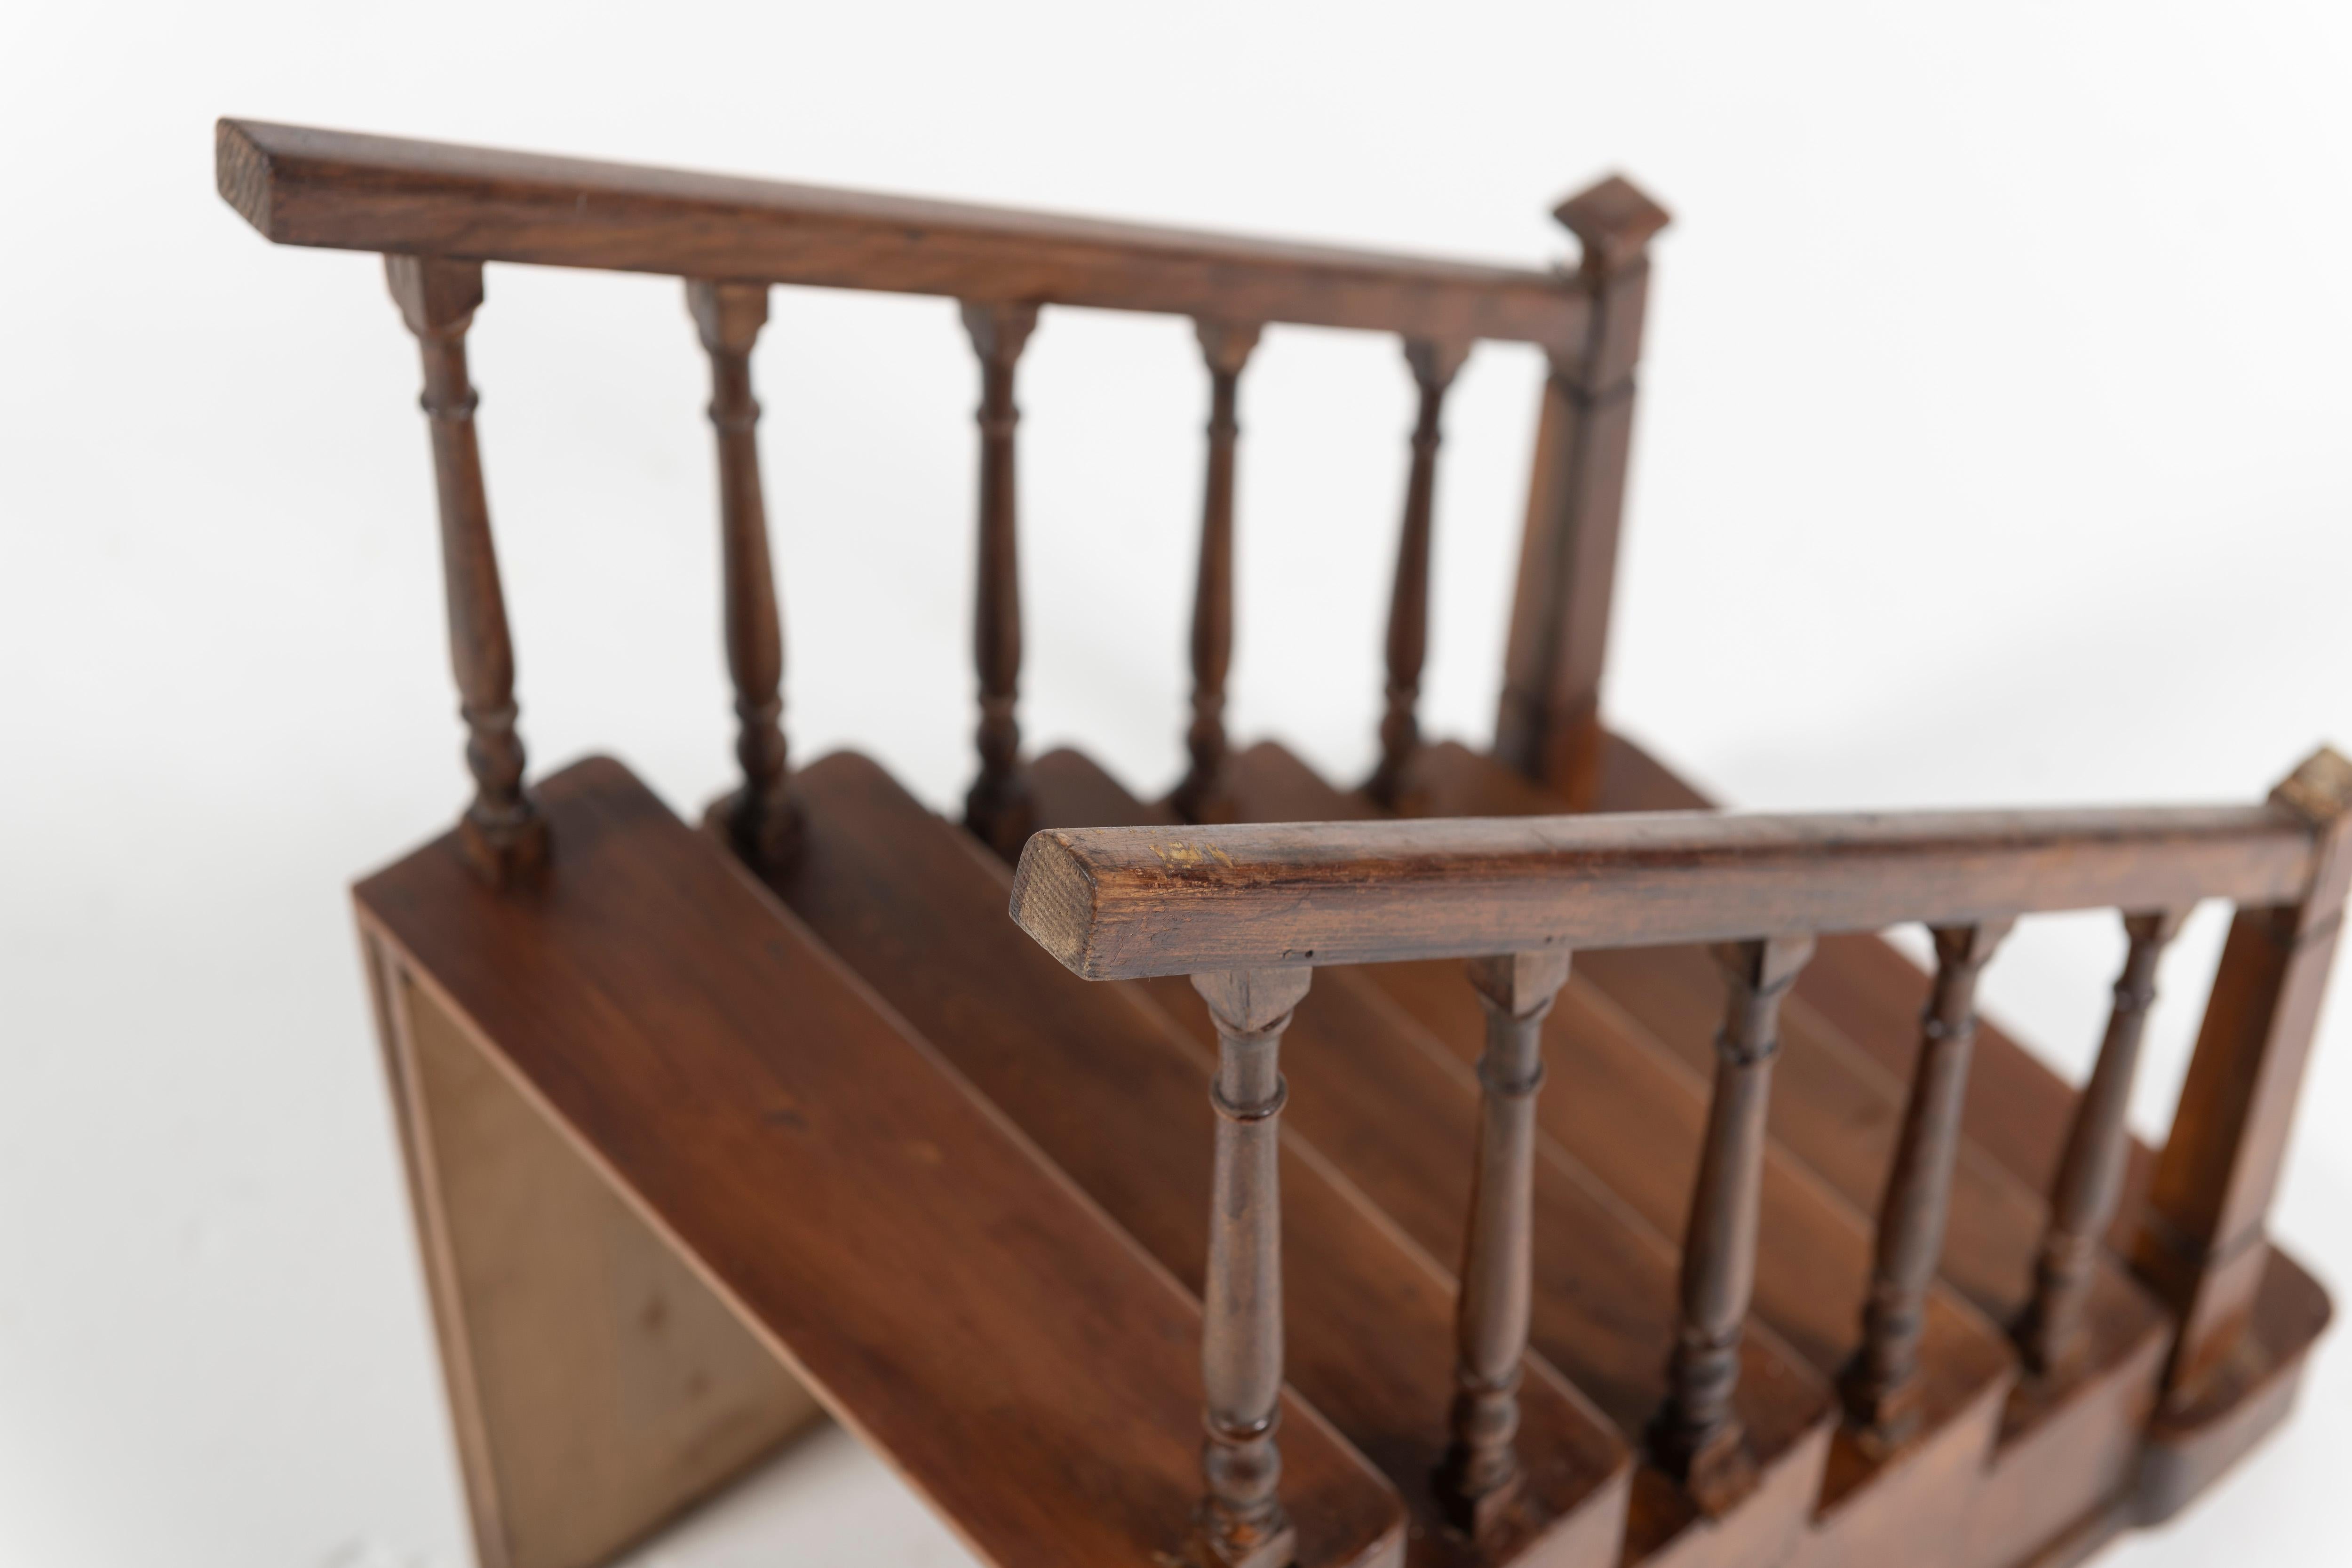 Walnut Antique Wooden Staircase Model, England, 1920s